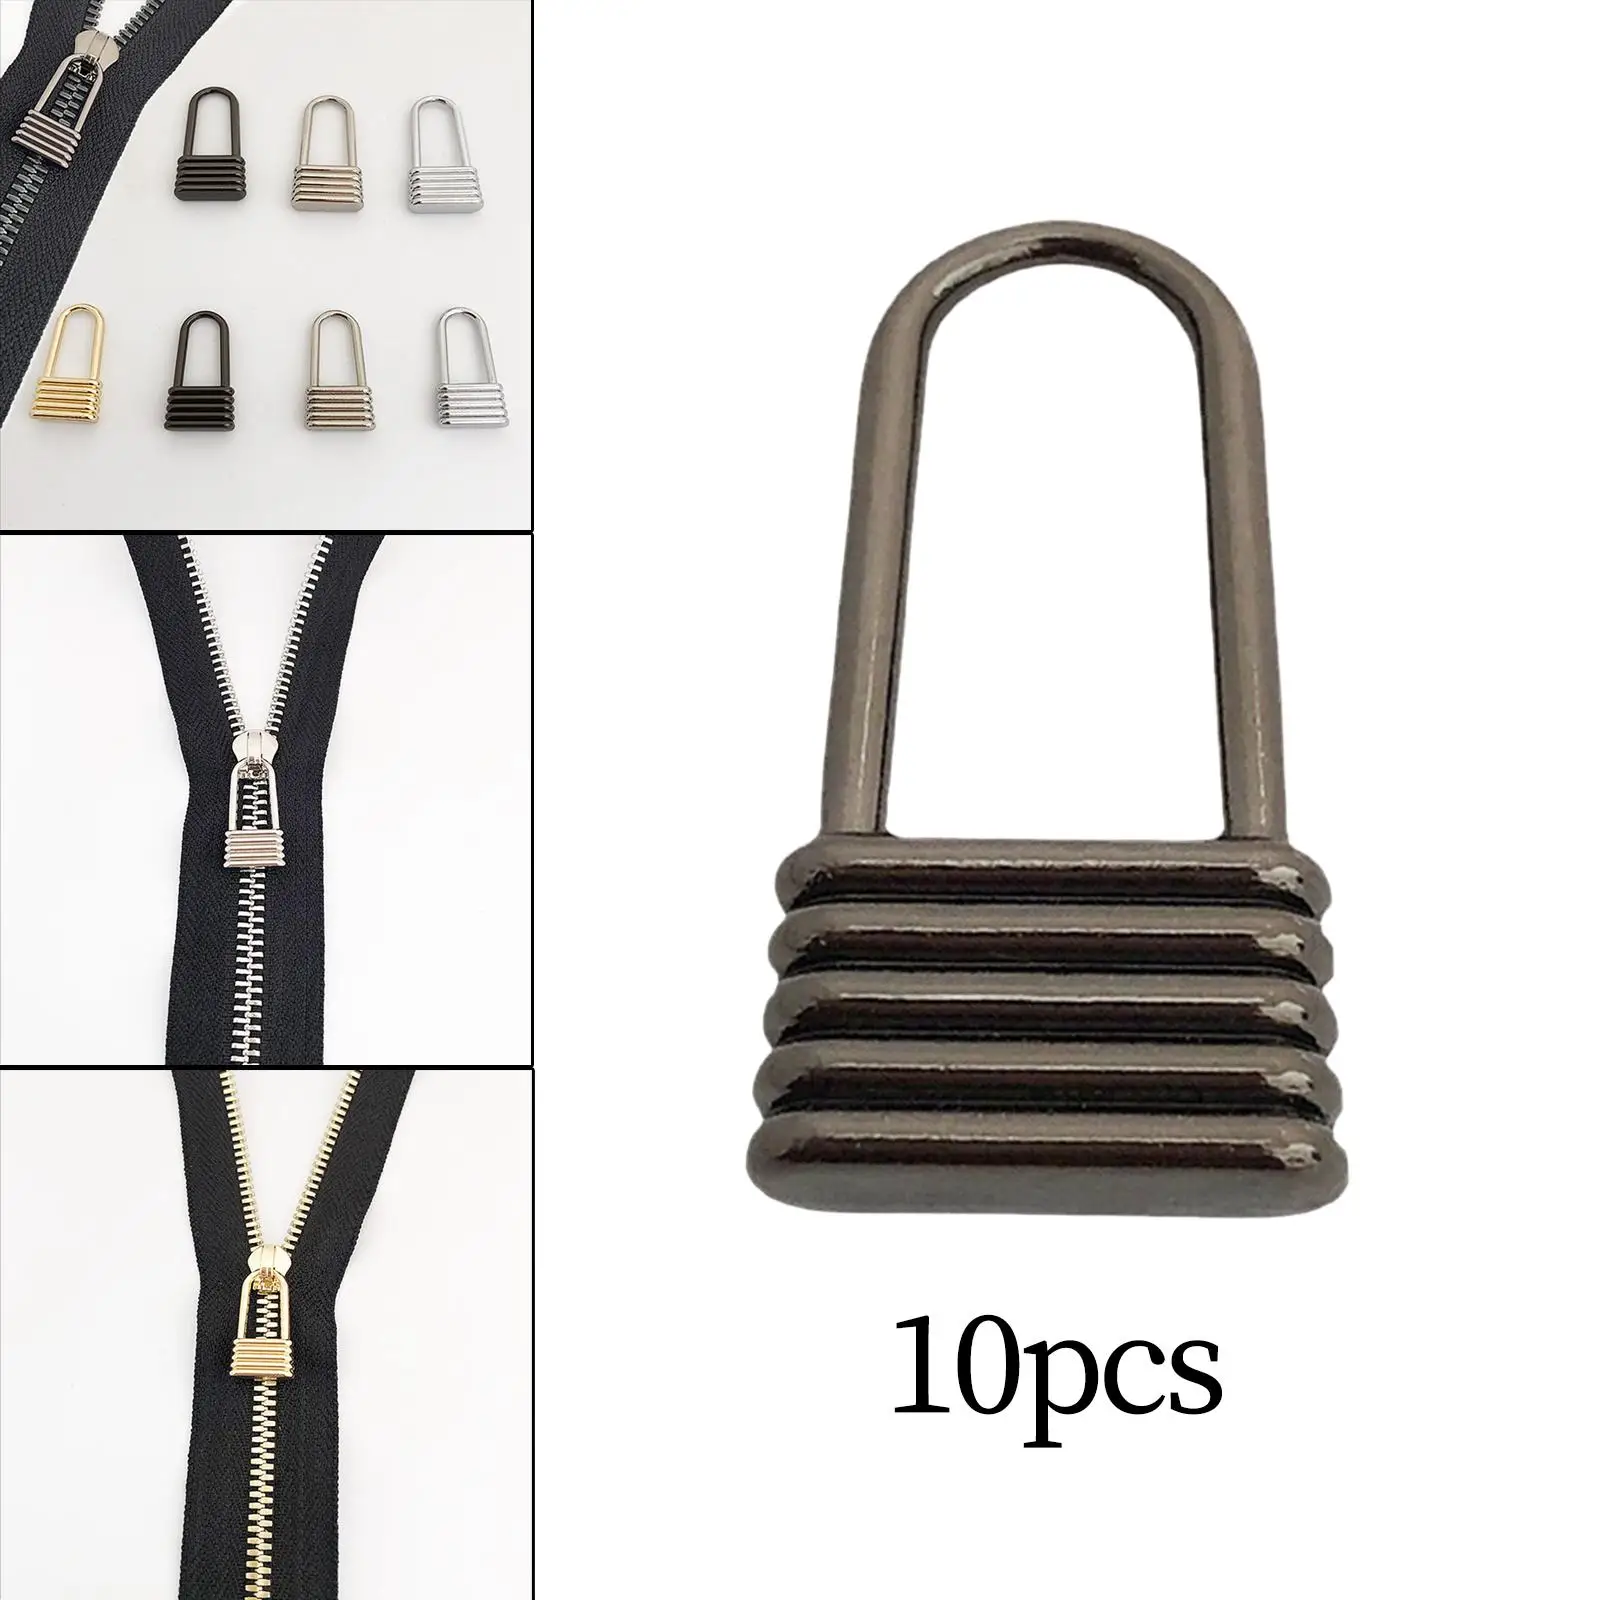 10Pcs Metal Zipper Pulls Accessories Mend Replace Handle Fixer Pull Tab Zipper Heads for Jacket Luggage Backpack Purse Suitcase